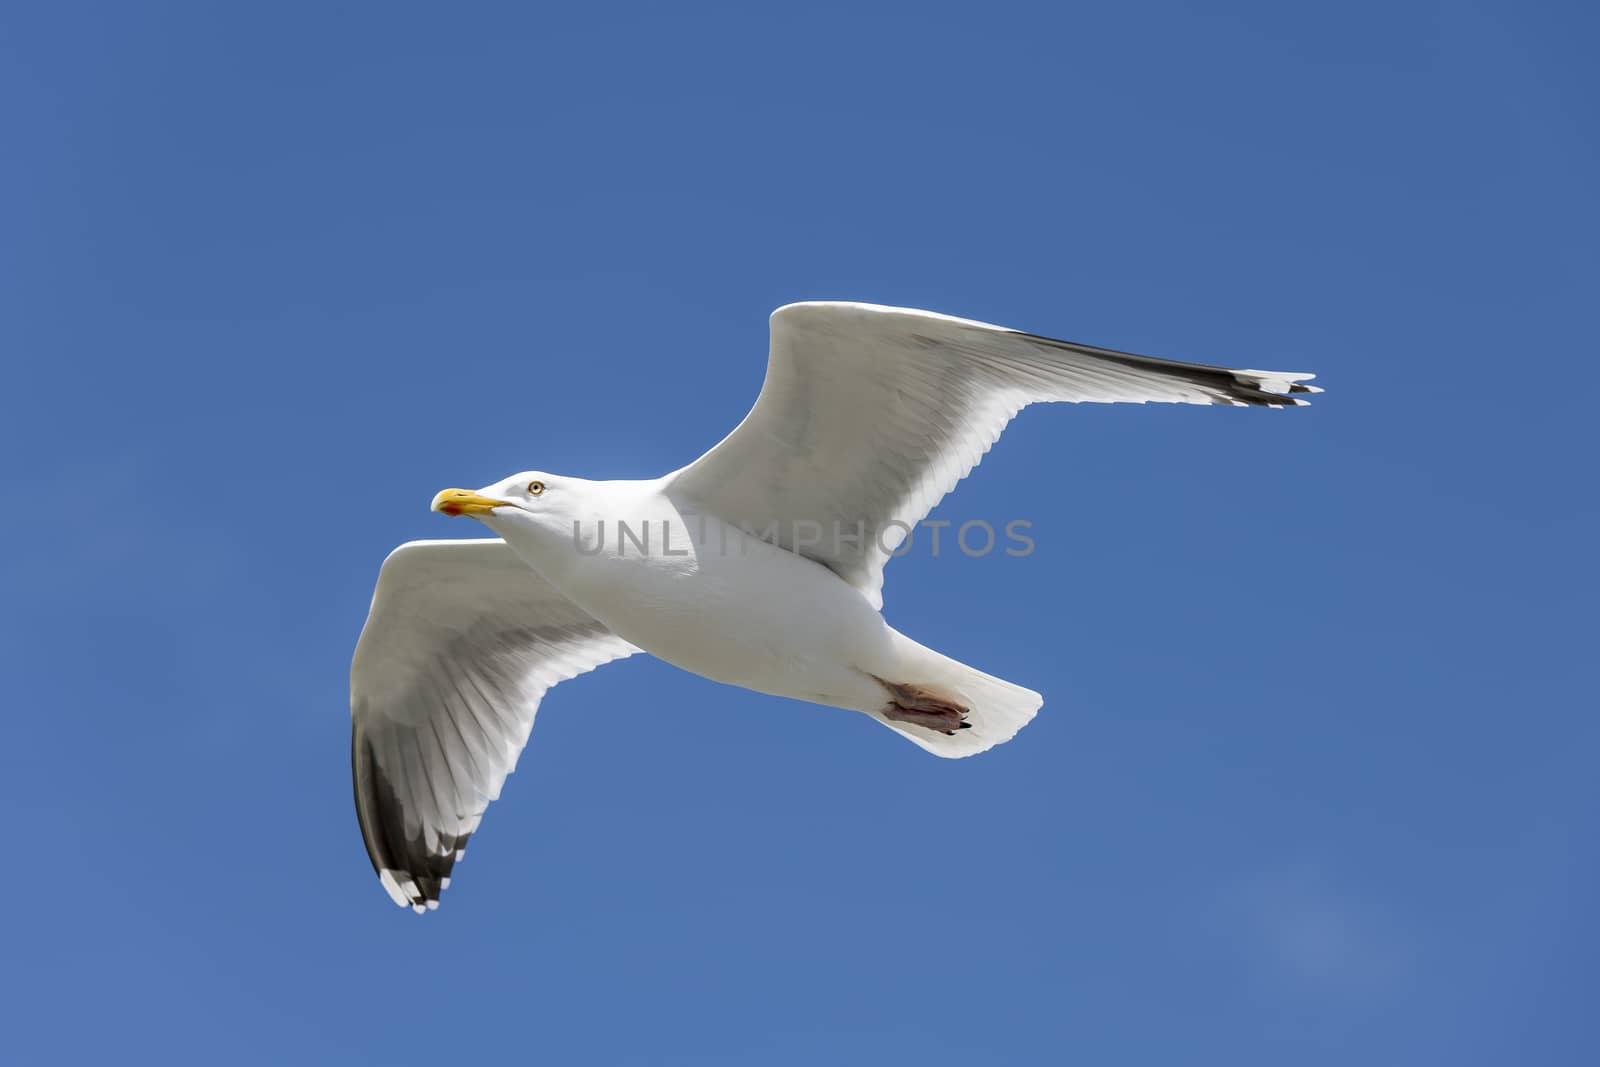 Seabird the Seagull against a blue sky
 by Tofotografie